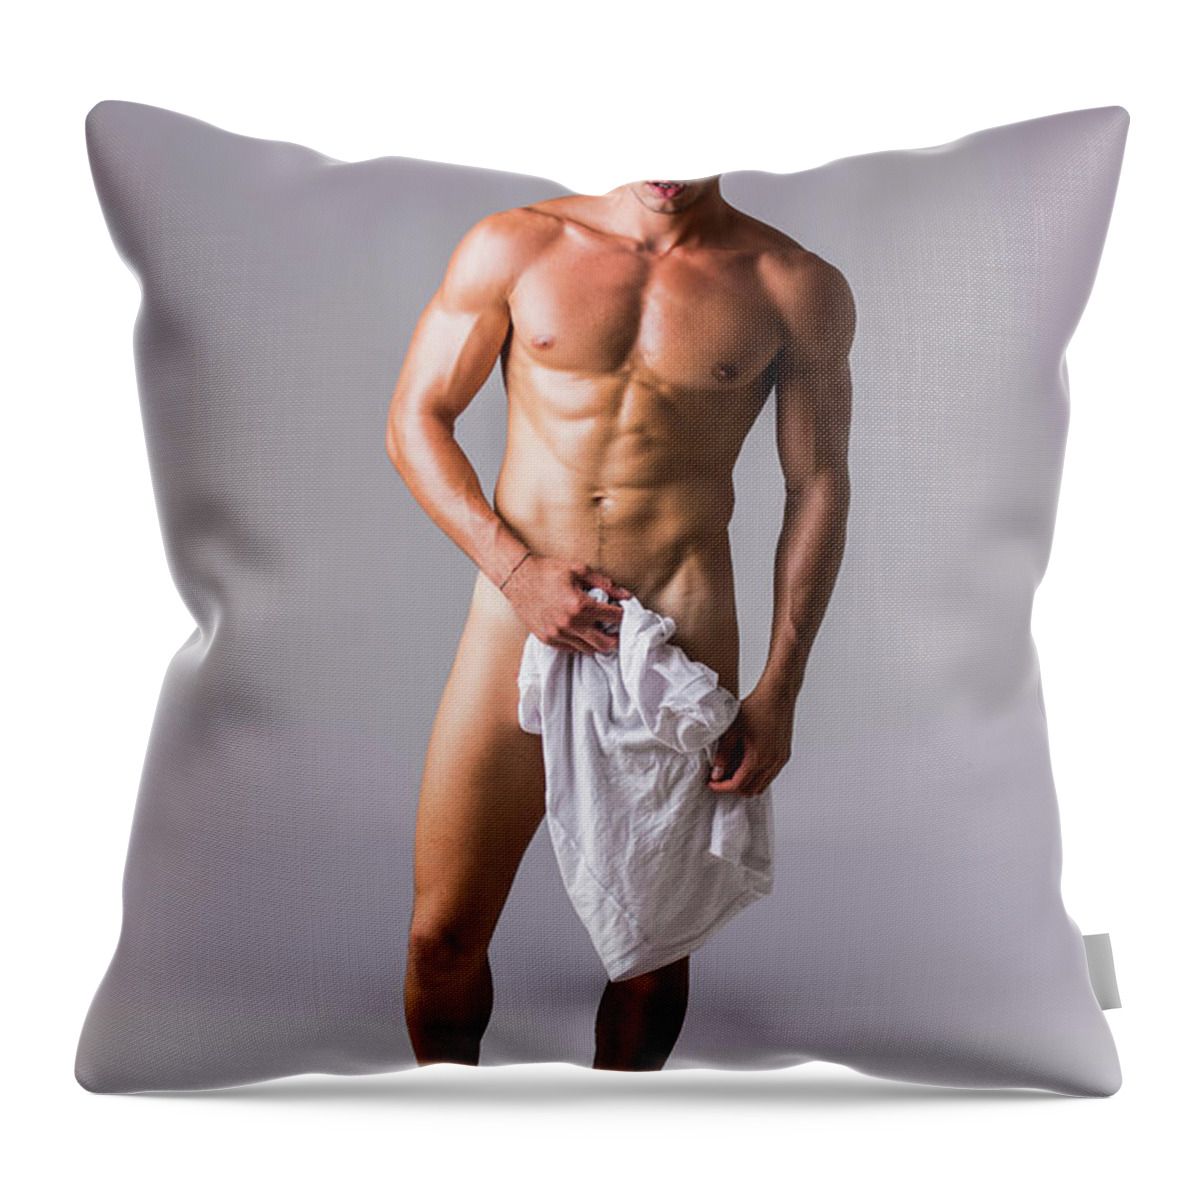 Naked muscular man covering crotch with shirt #6 Throw Pillow